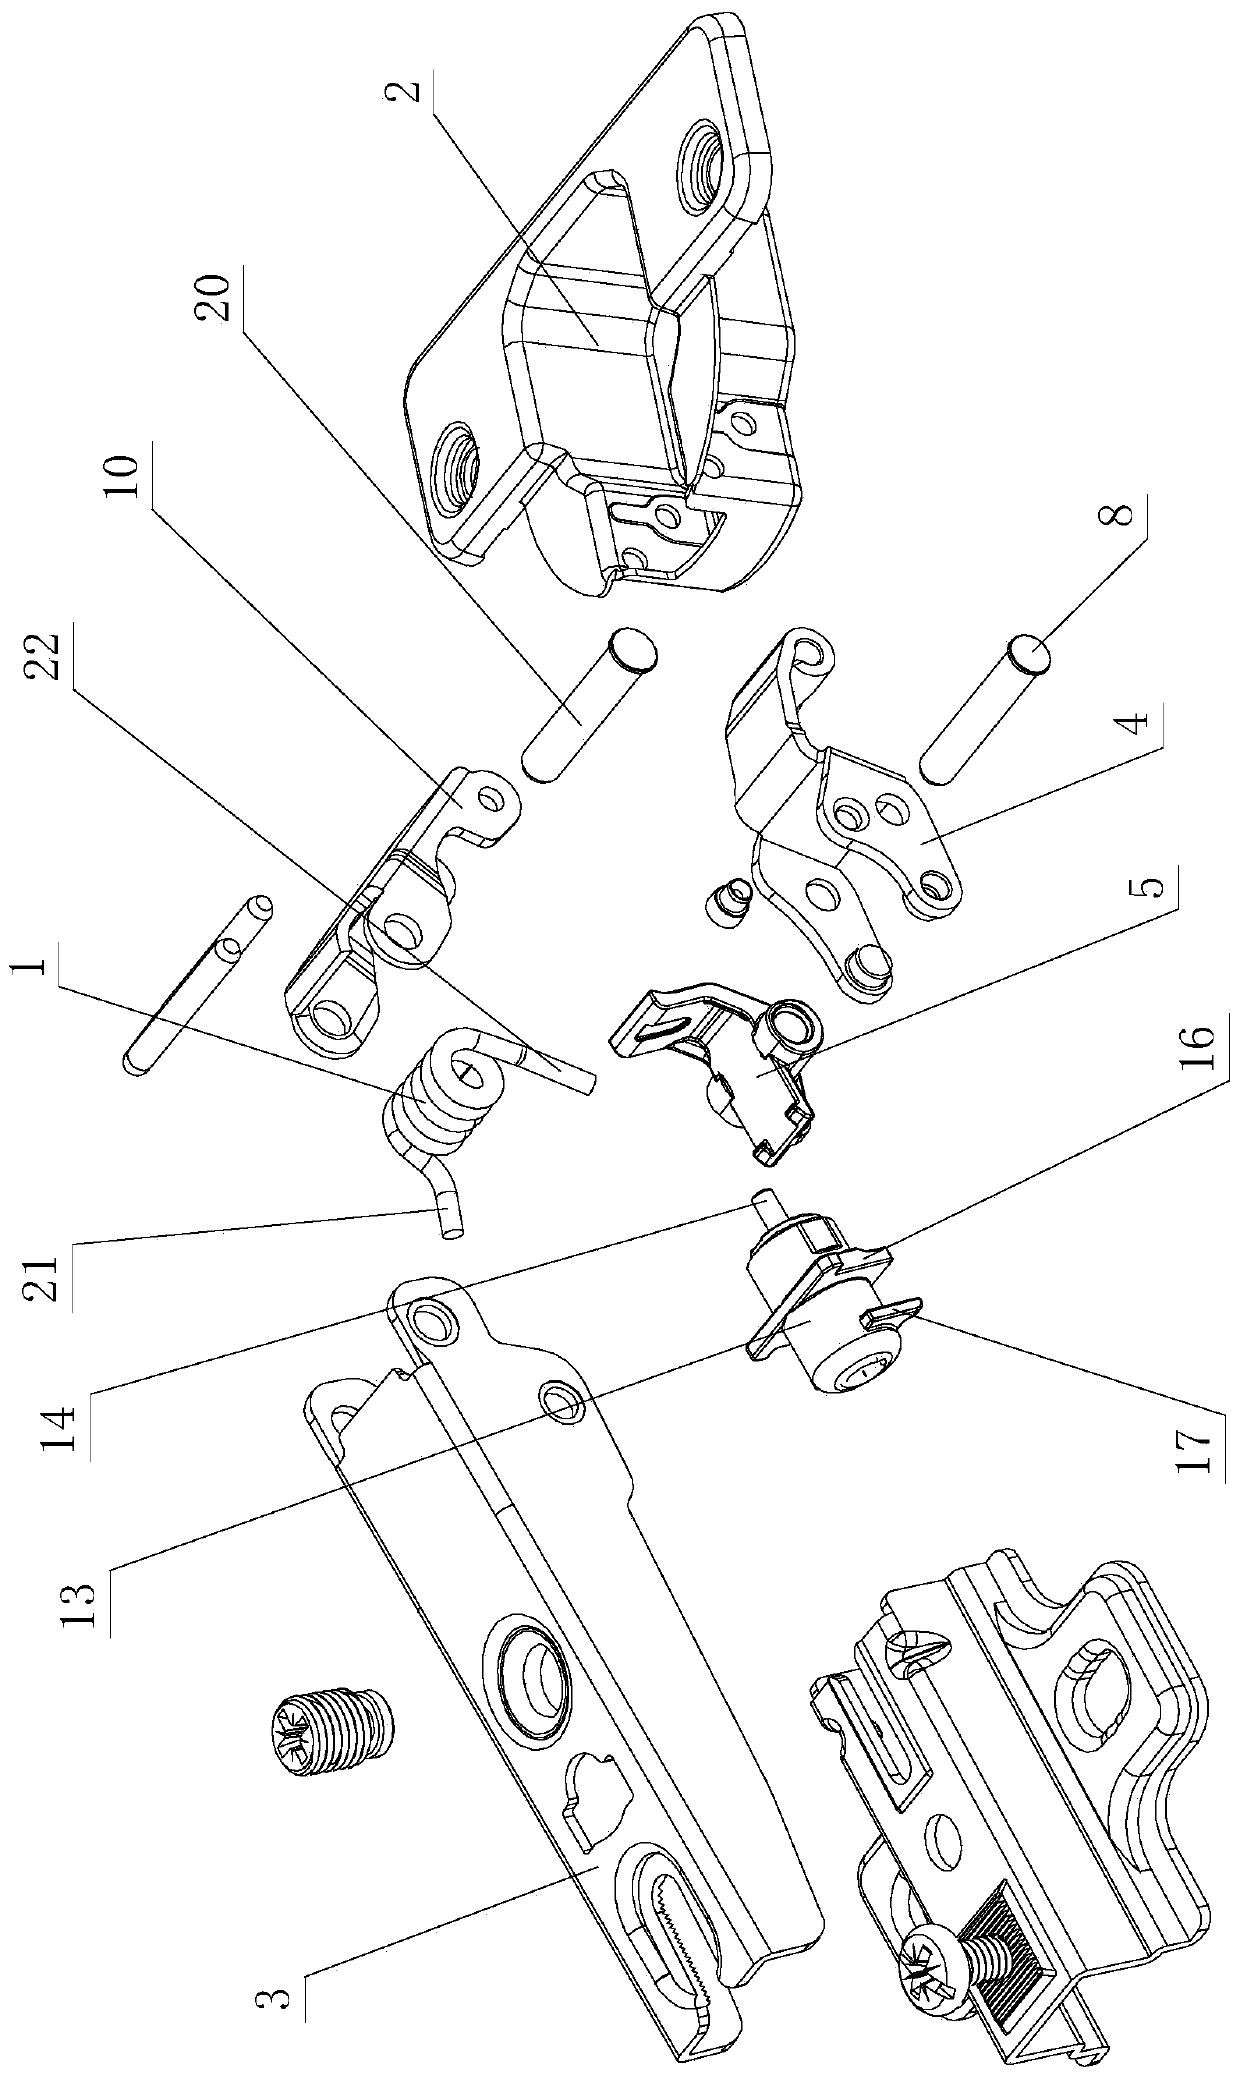 Integrated optimized damping structure of furniture hinge